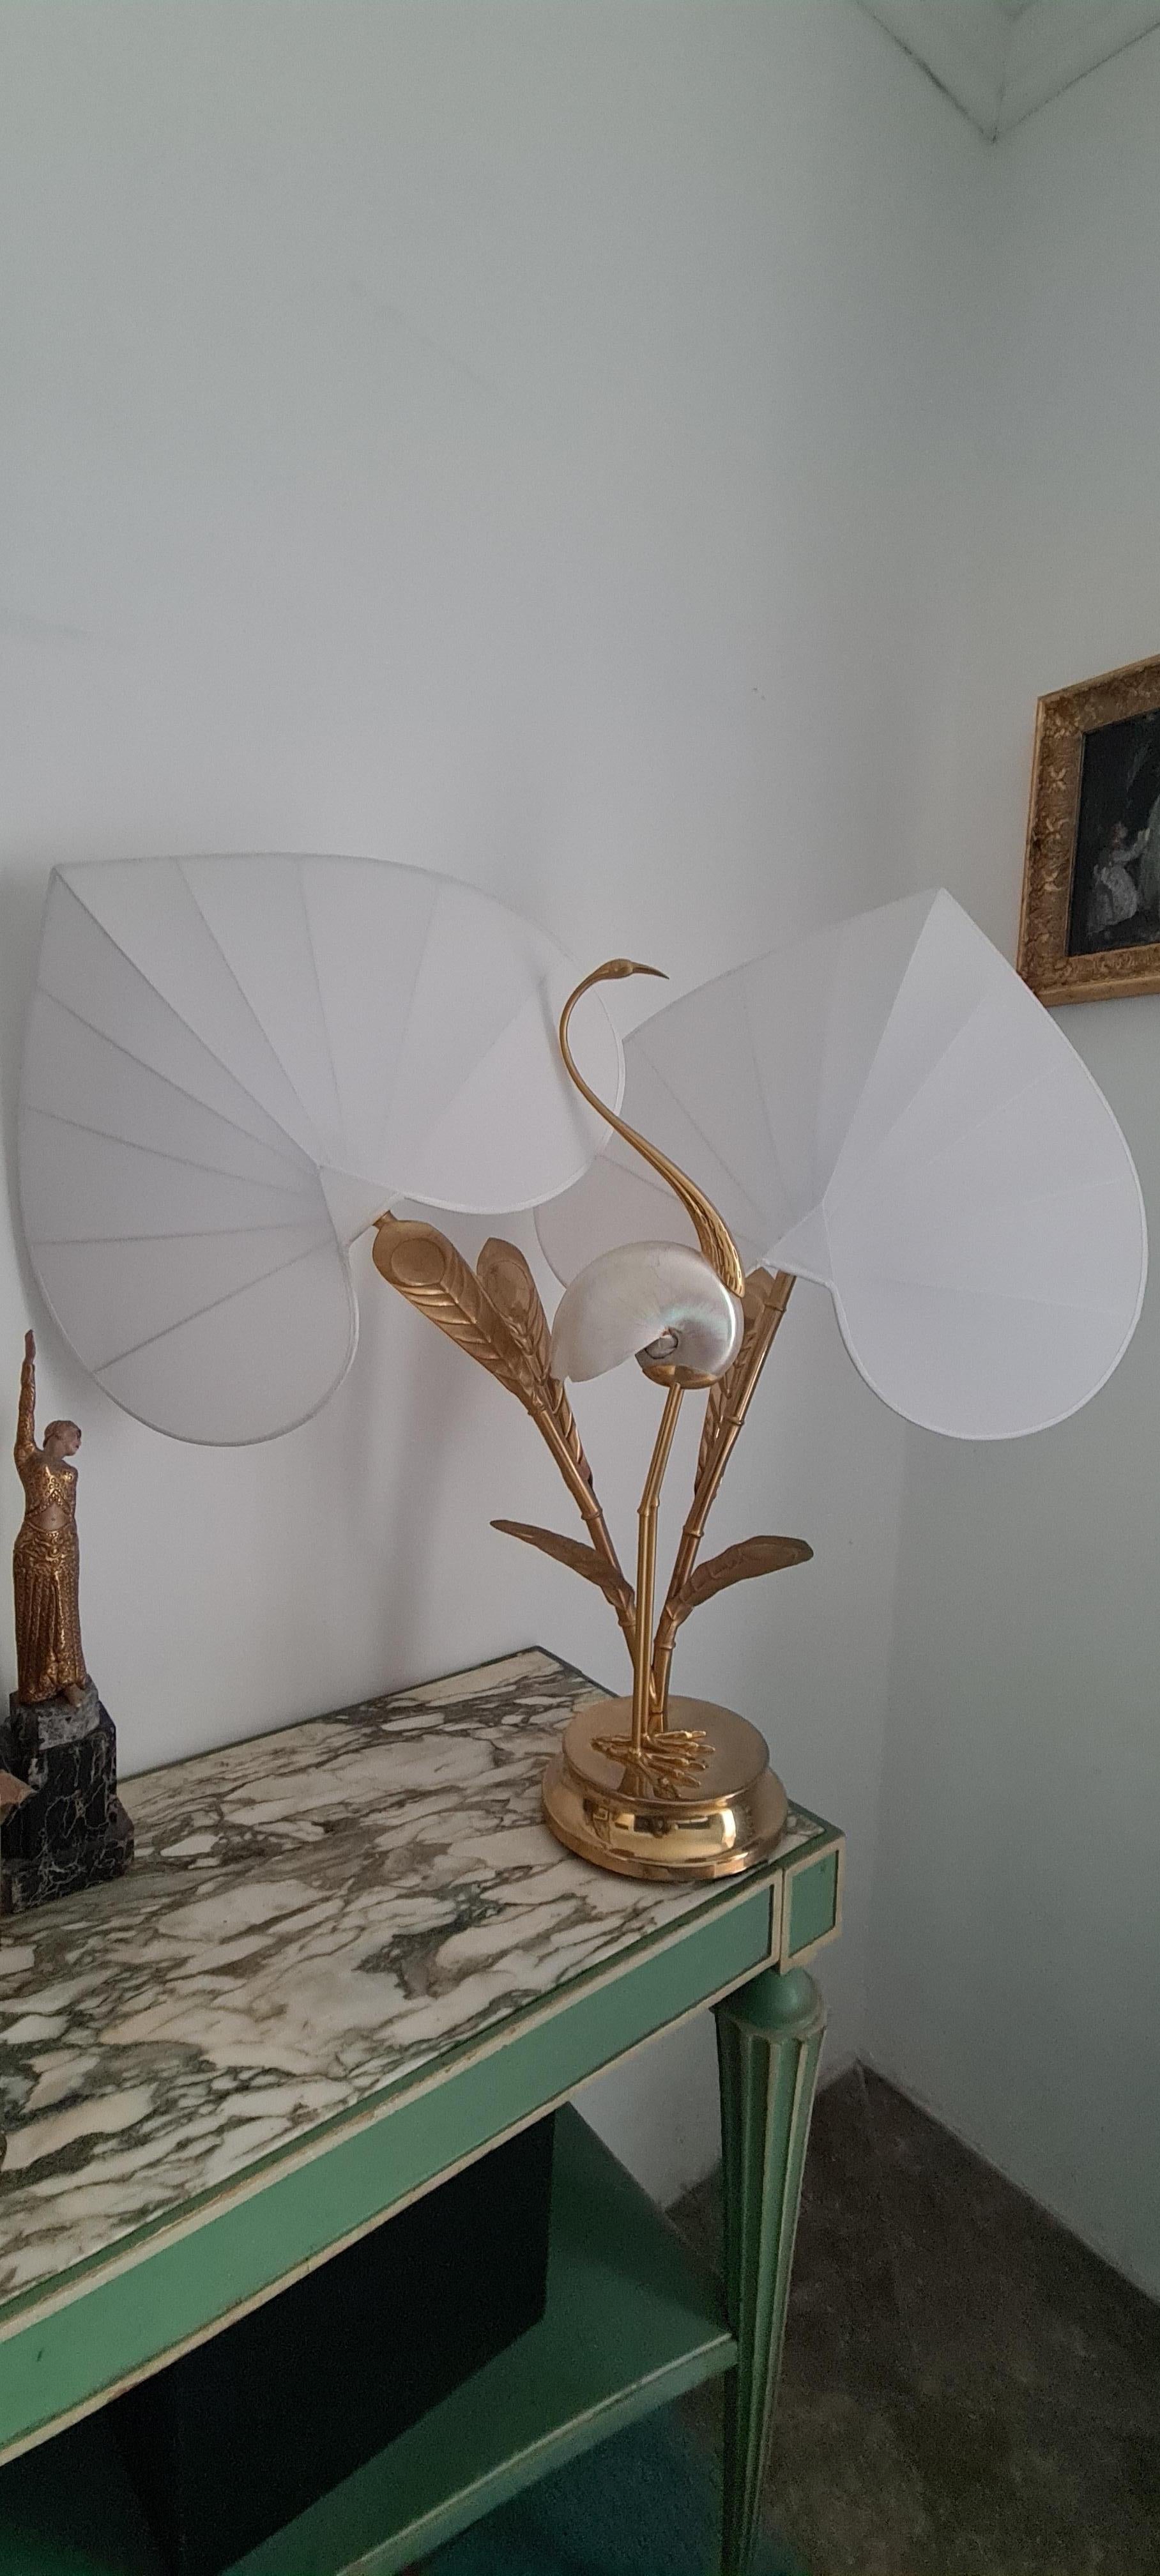 Antonio Pavia Lamp.

Table lamp by designer Antonio Pavia.

Lamp with brass base, brass bamboo-shaped stem and brass leaves, central heron-shaped statue made of brass and shell  of Nautilus in mother-of-pearl.

The hats of the two points of light